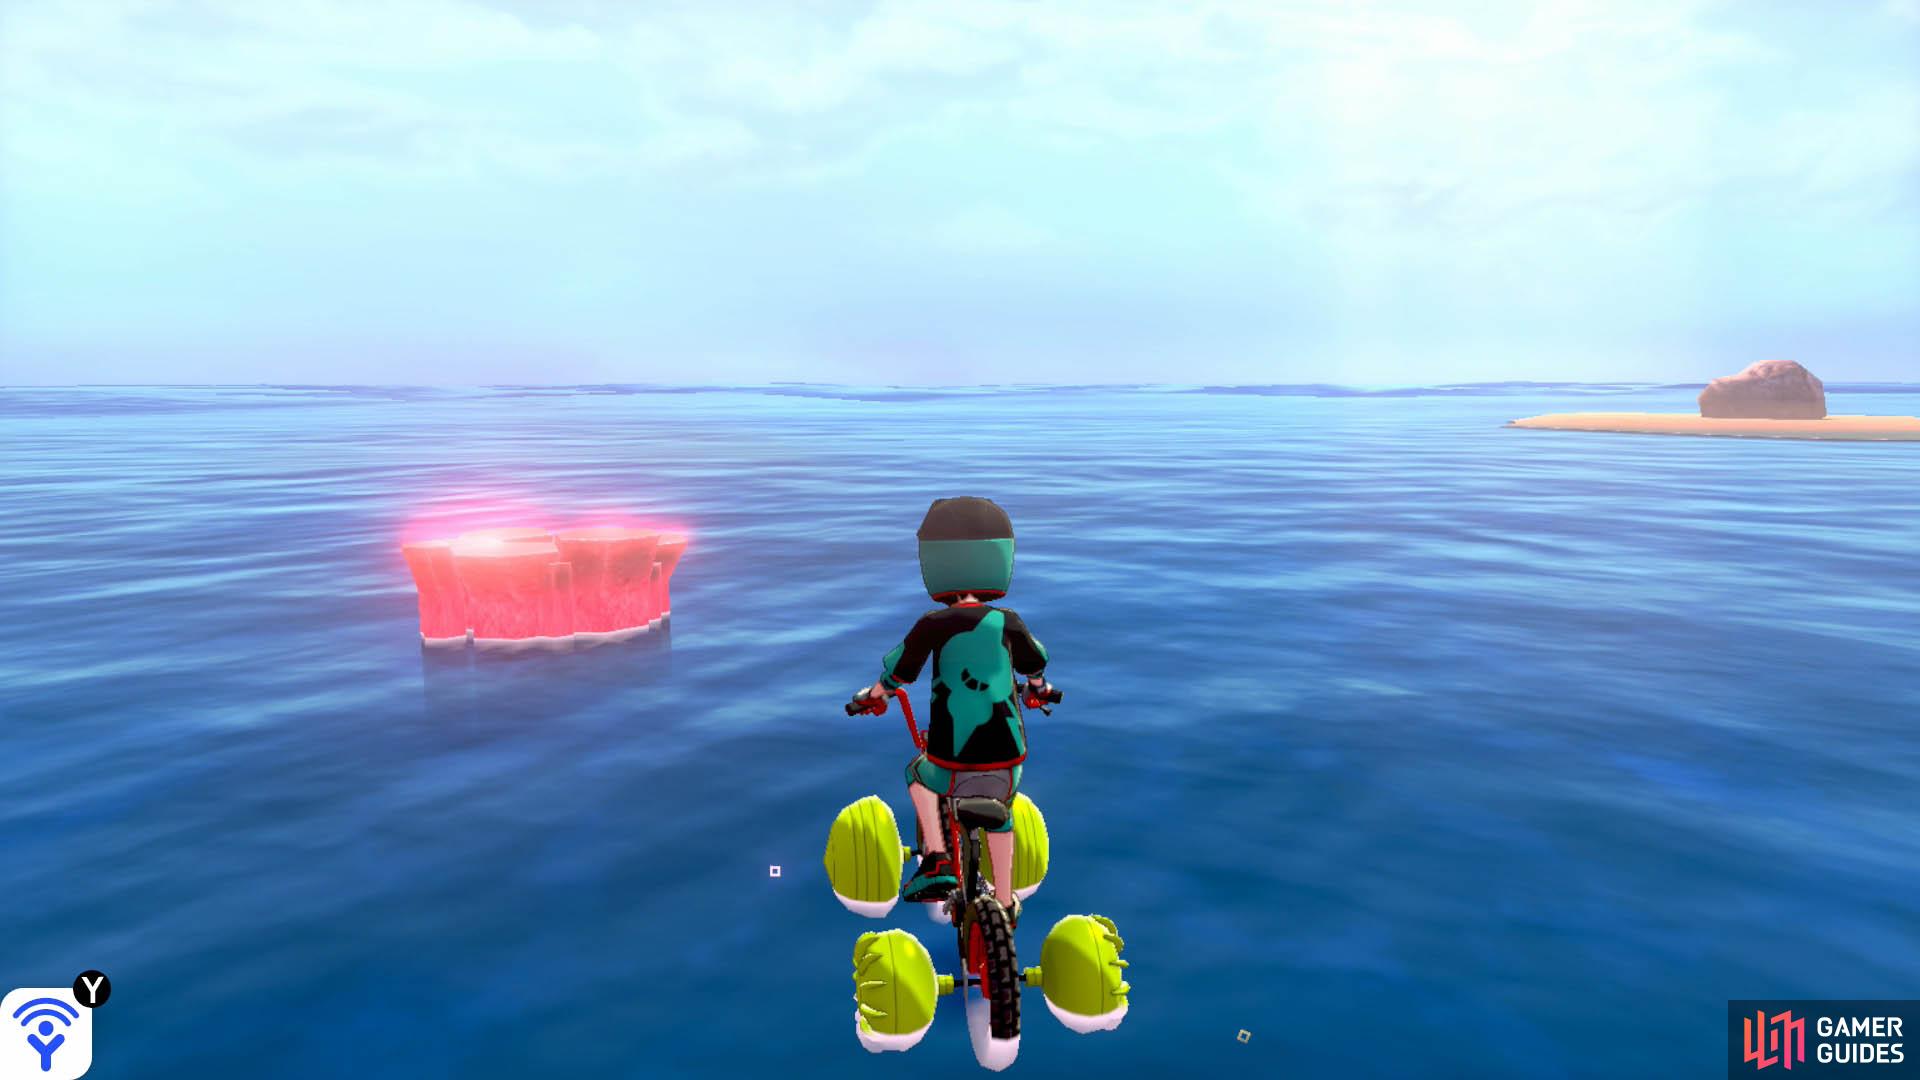 Return to the first islet, directly opposite Armor Station. Straight ahead, in the distance, there should be a den that's near an islet with a boulder. That's the den you're looking for. Expect an incoming Sharpedo.